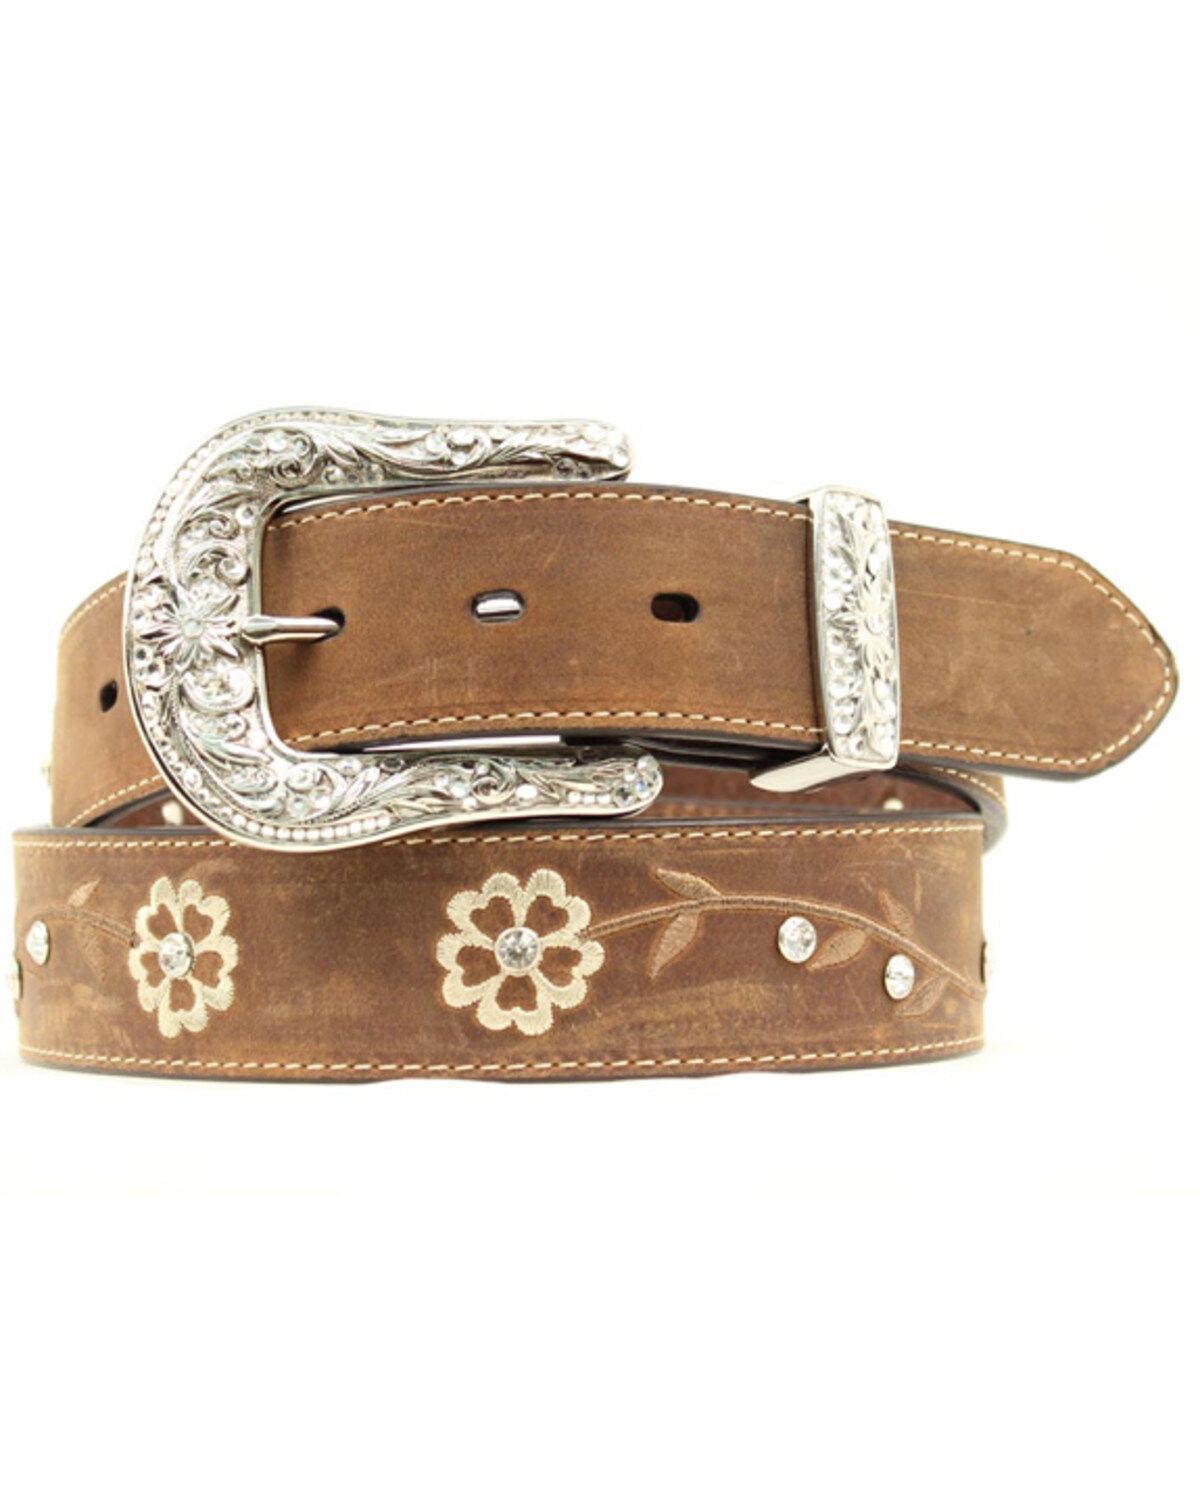 Ariat Western Womens Belt Leather Two Heart Buckle Choc Brown A1523002 